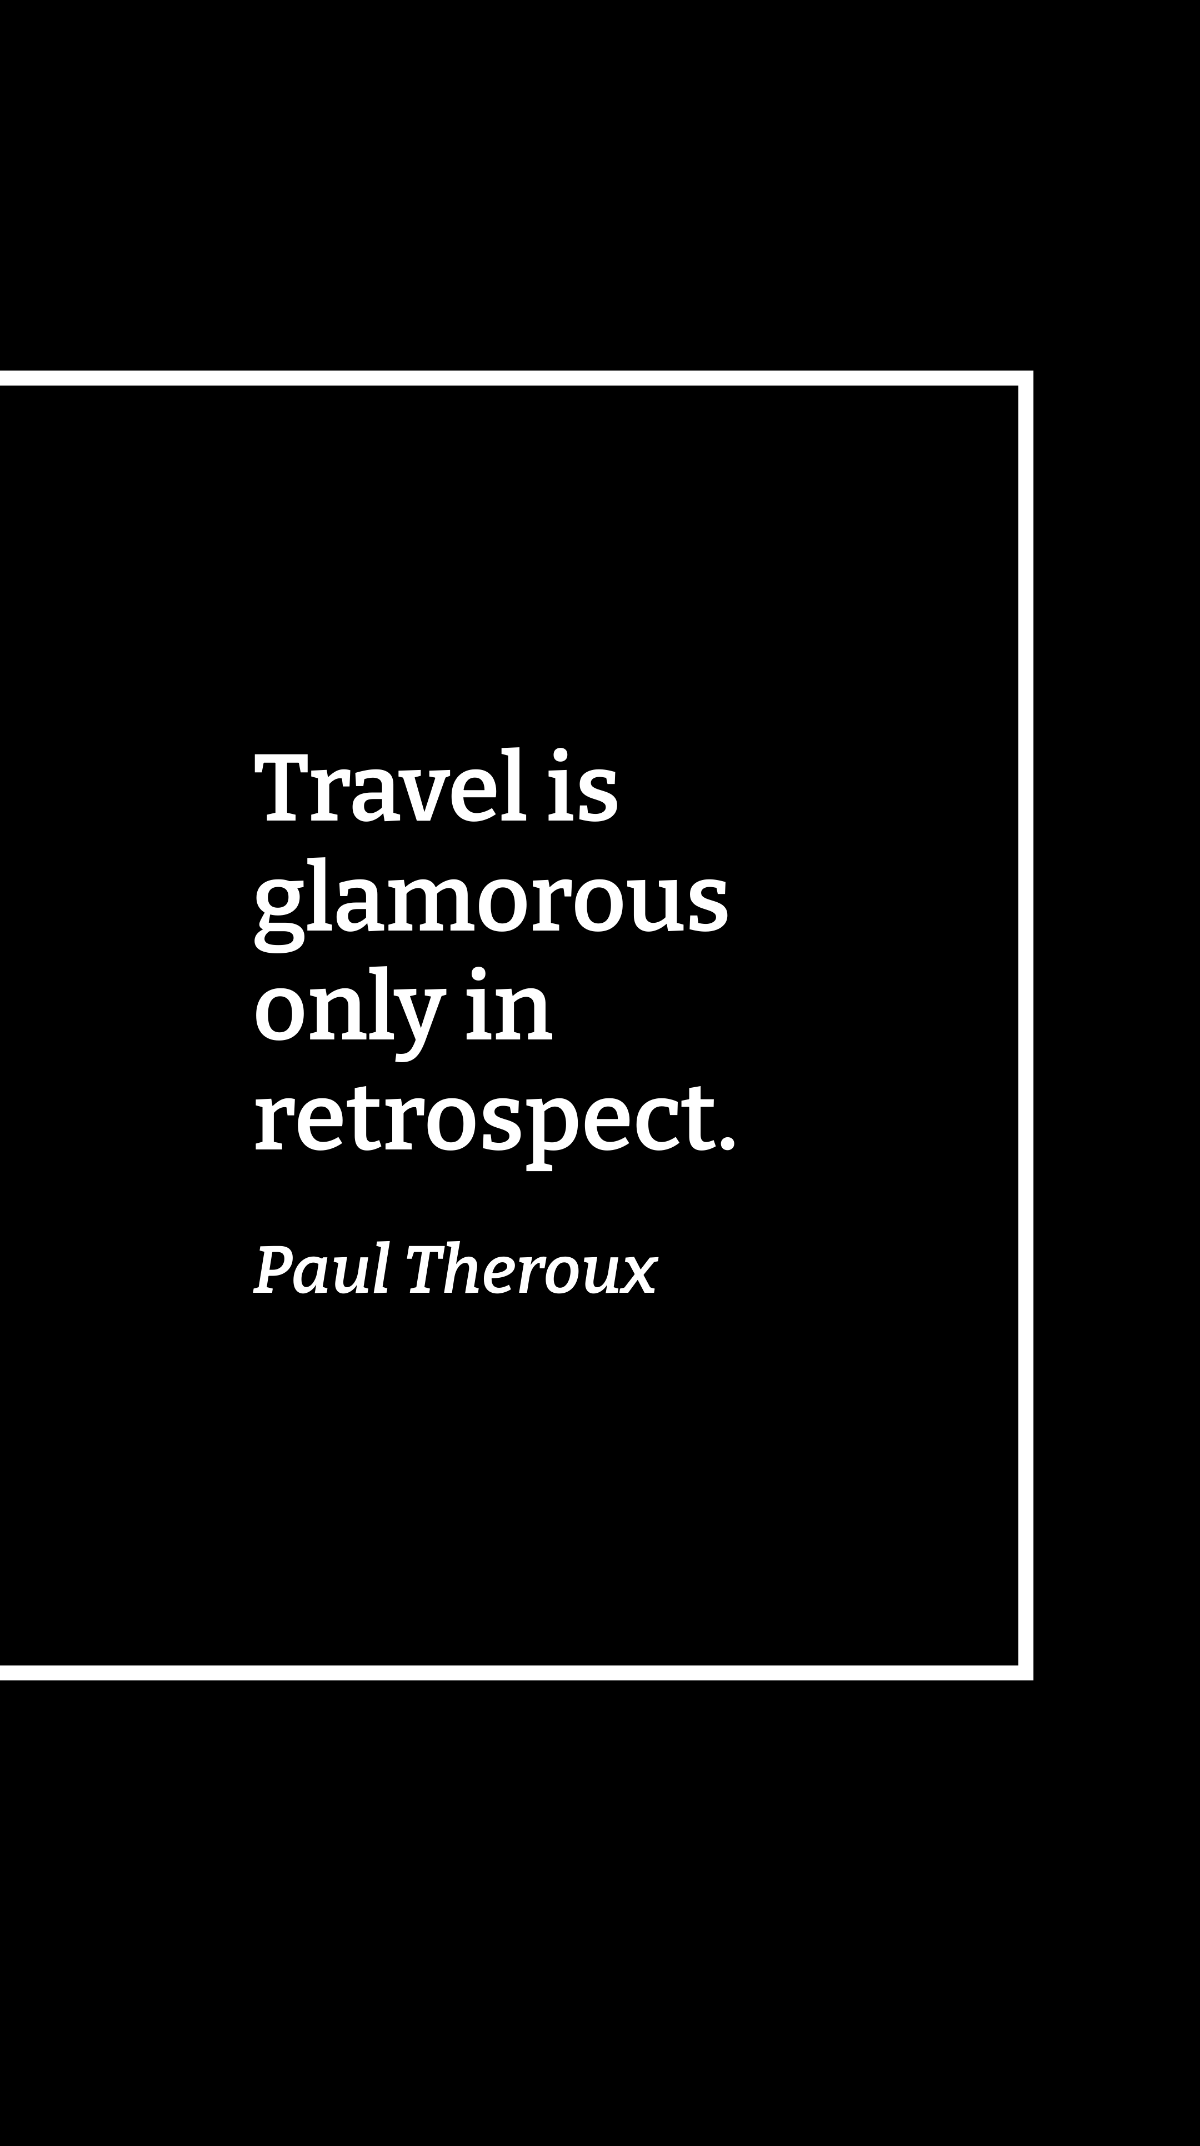 Paul Theroux - Travel is glamorous only in retrospect. Template